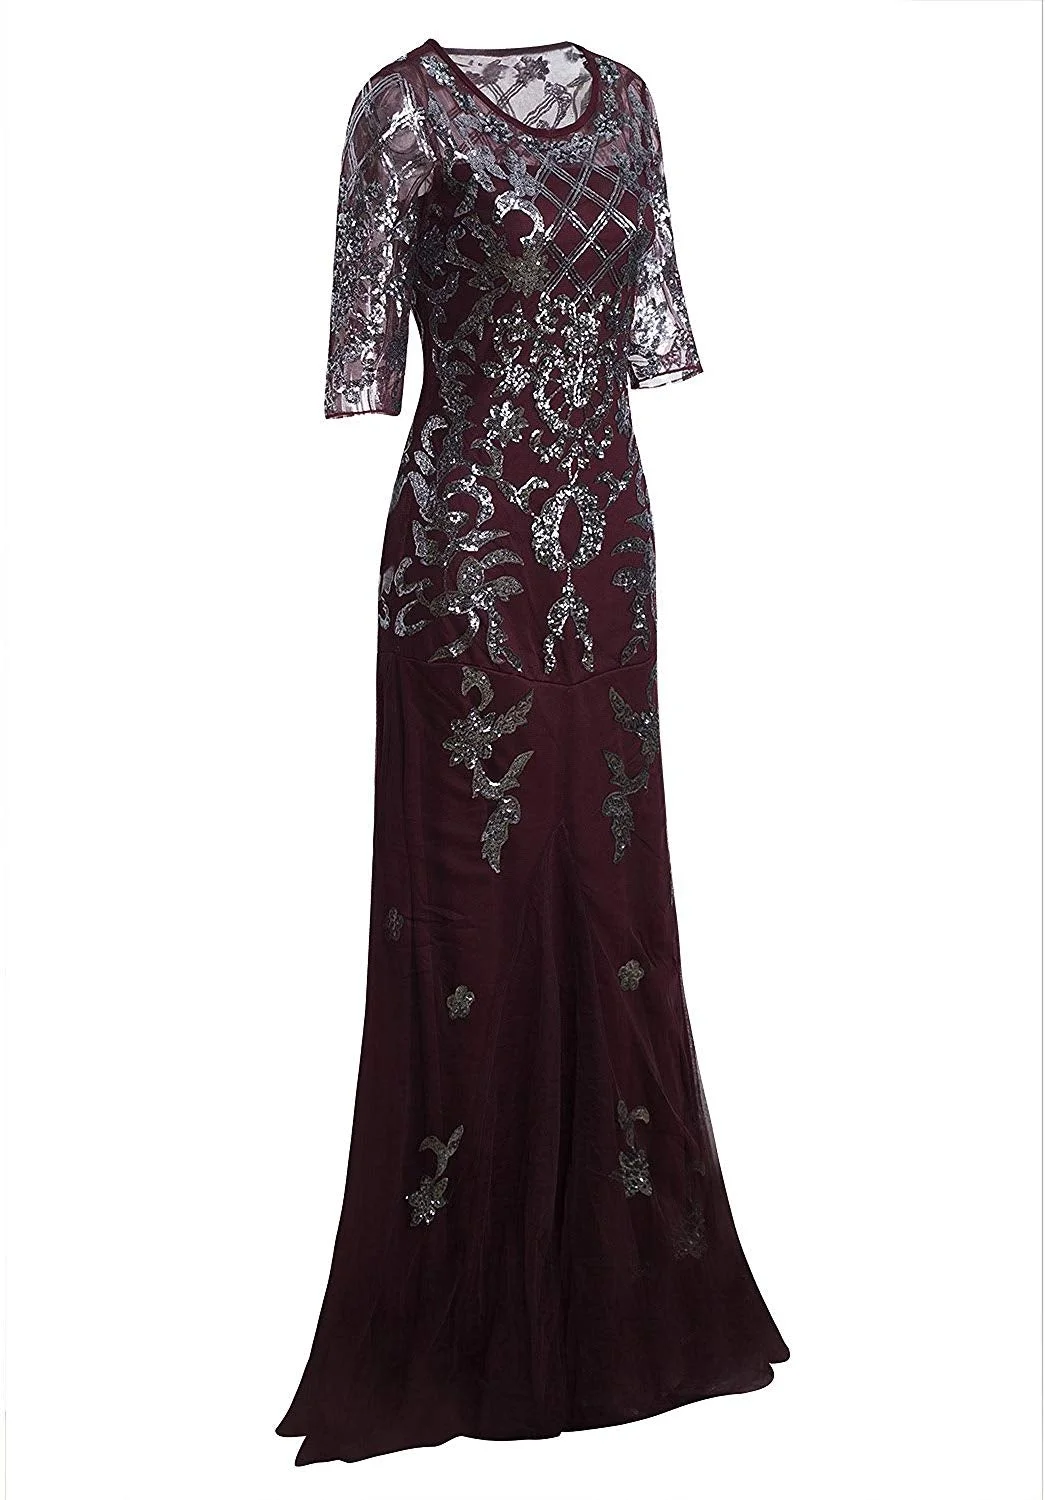 Vintage 1920s Long Wedding Prom Dresses 2/3 Sleeve Sequin Party Evening ...